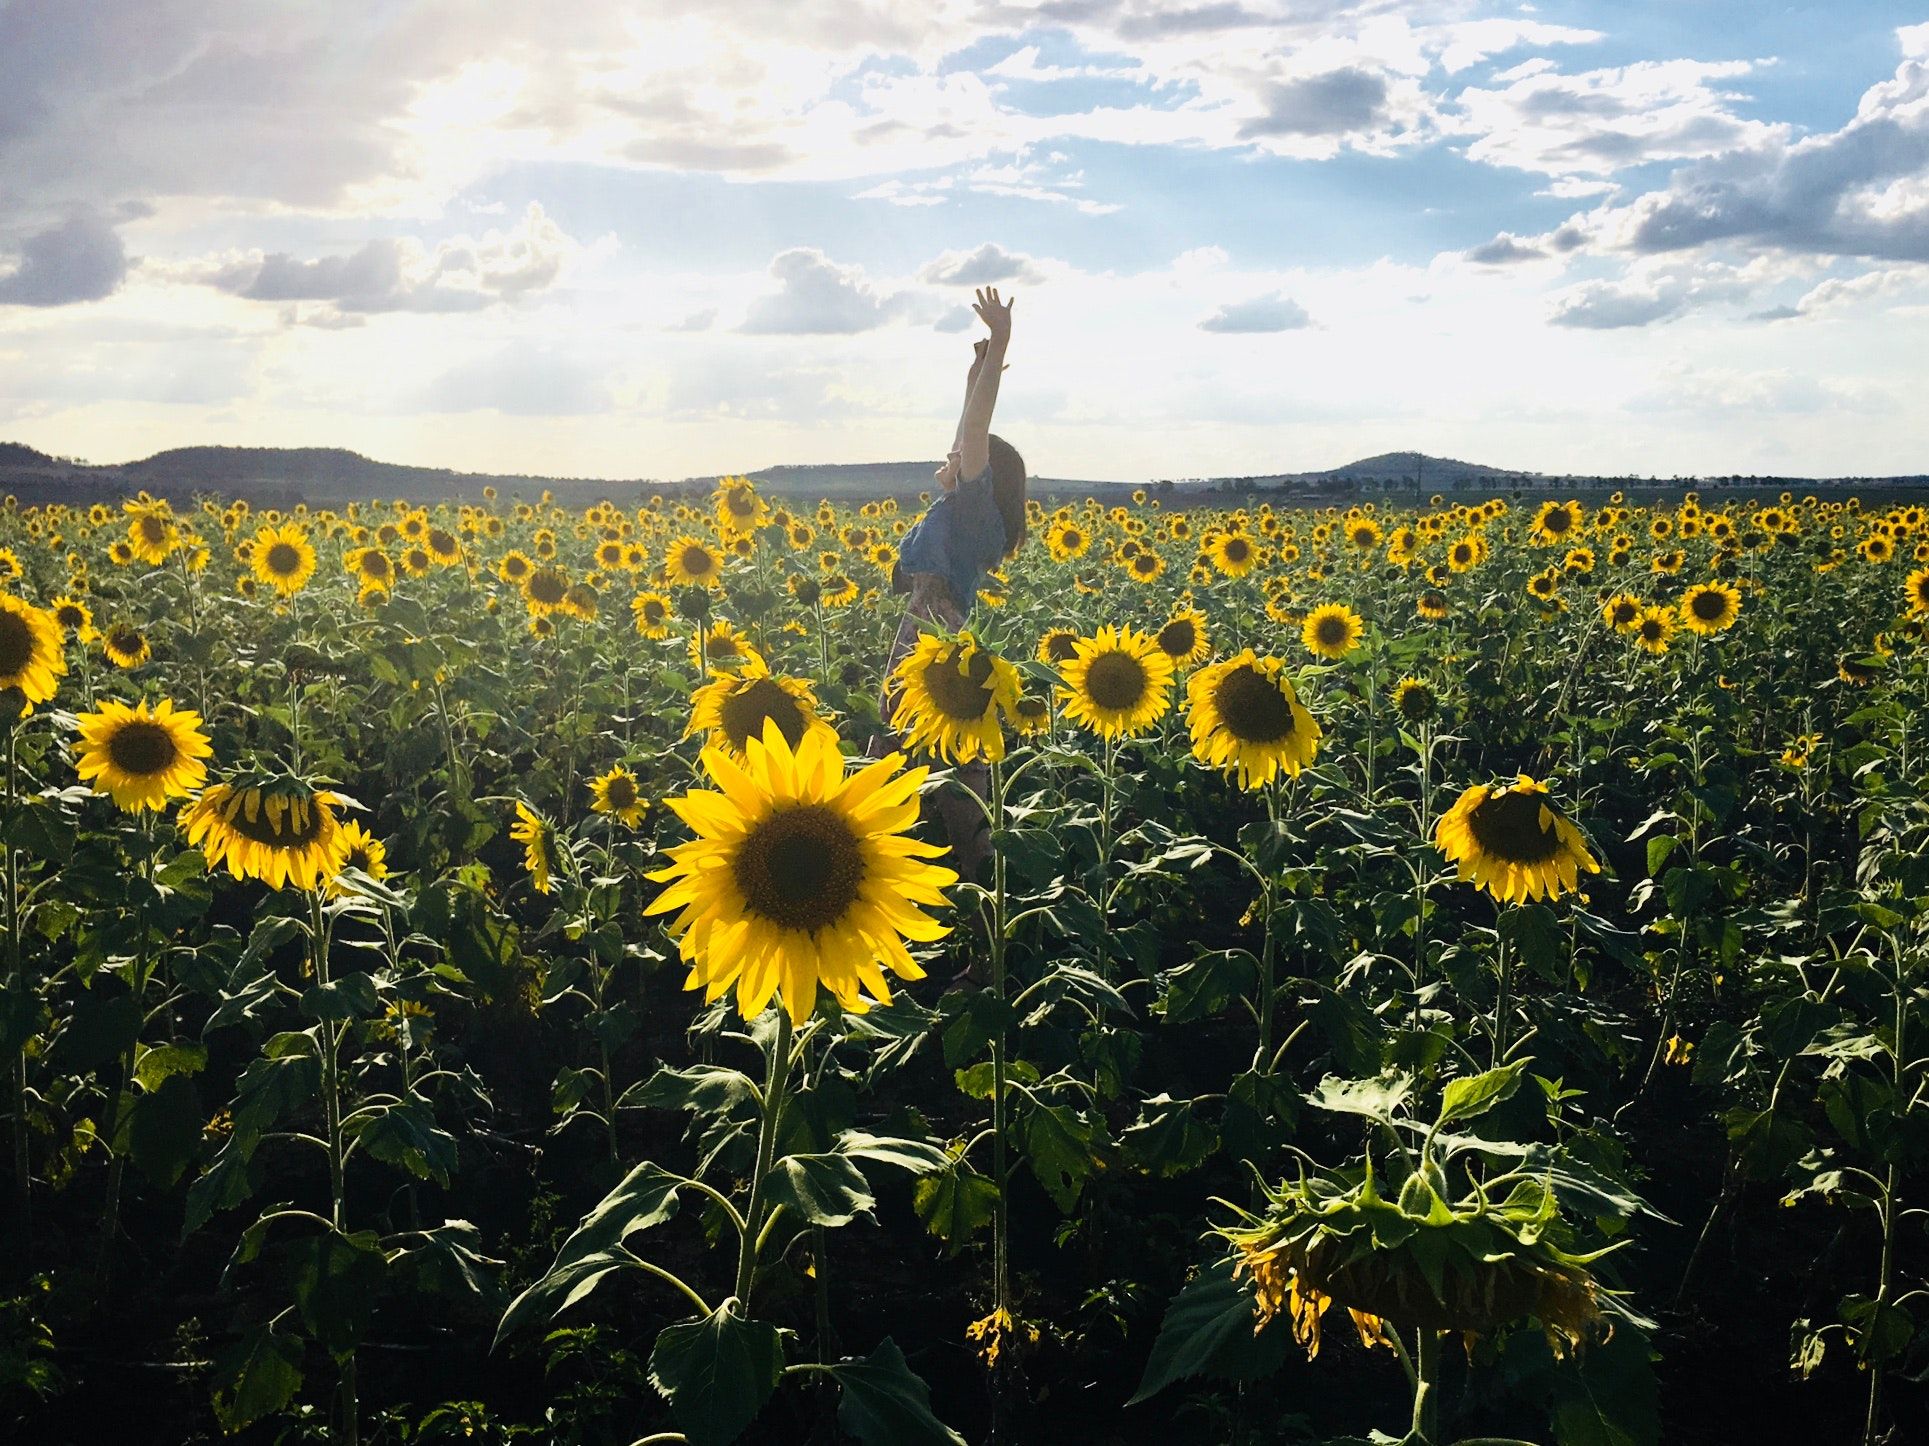 Person in Blue Shirt on Sunflower Field Photo Shot · Free